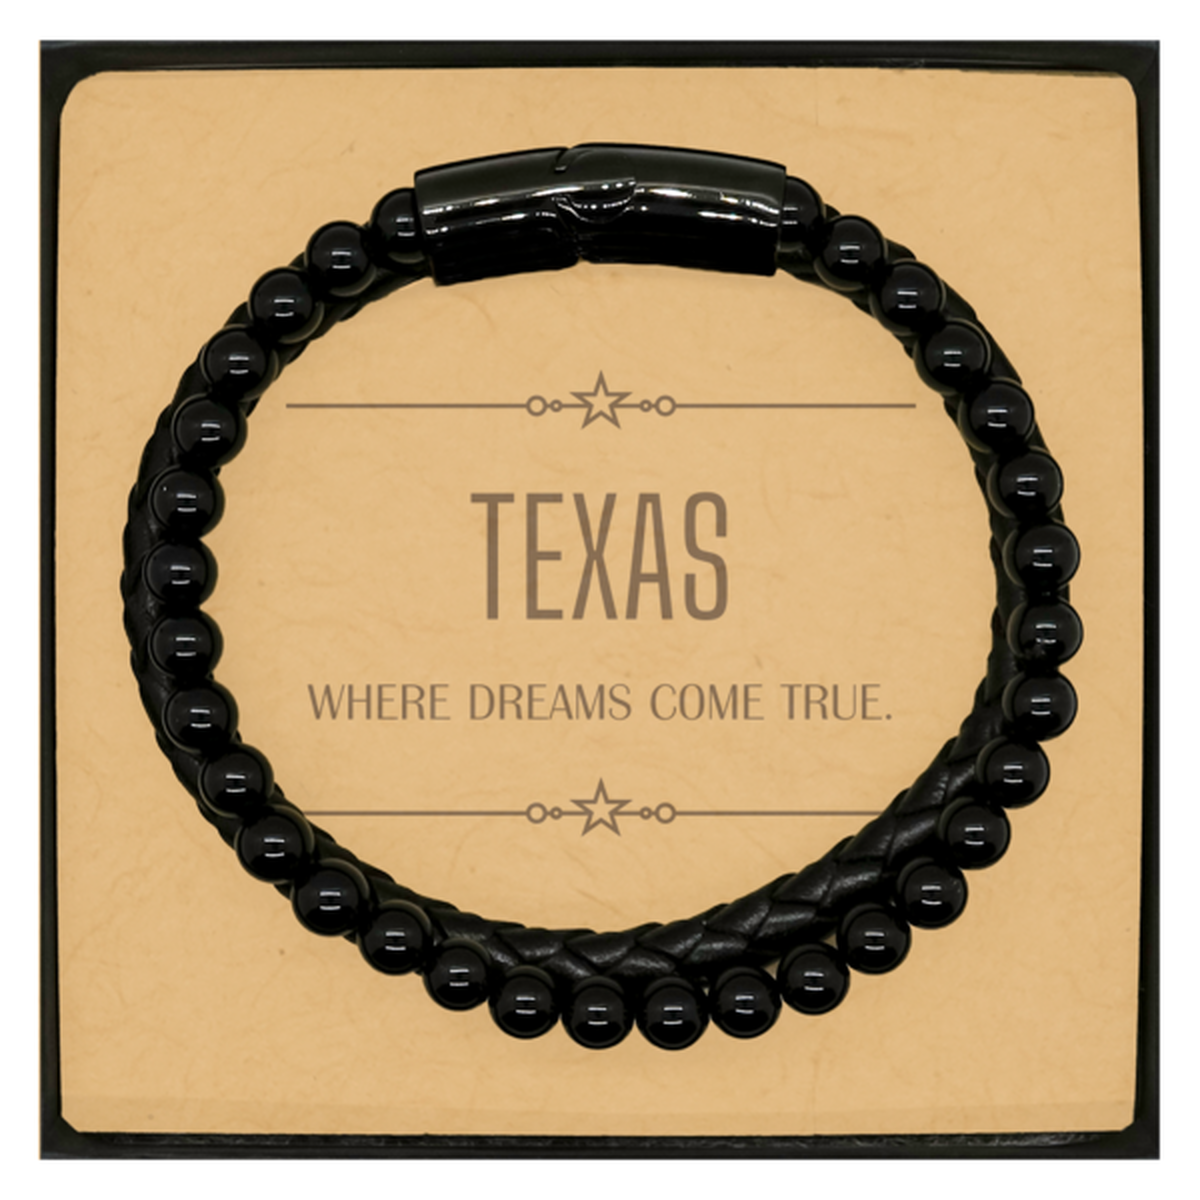 Love Texas State Stone Leather Bracelets, Texas Where dreams come true, Birthday Christmas Inspirational Gifts For Texas Men, Women, Friends